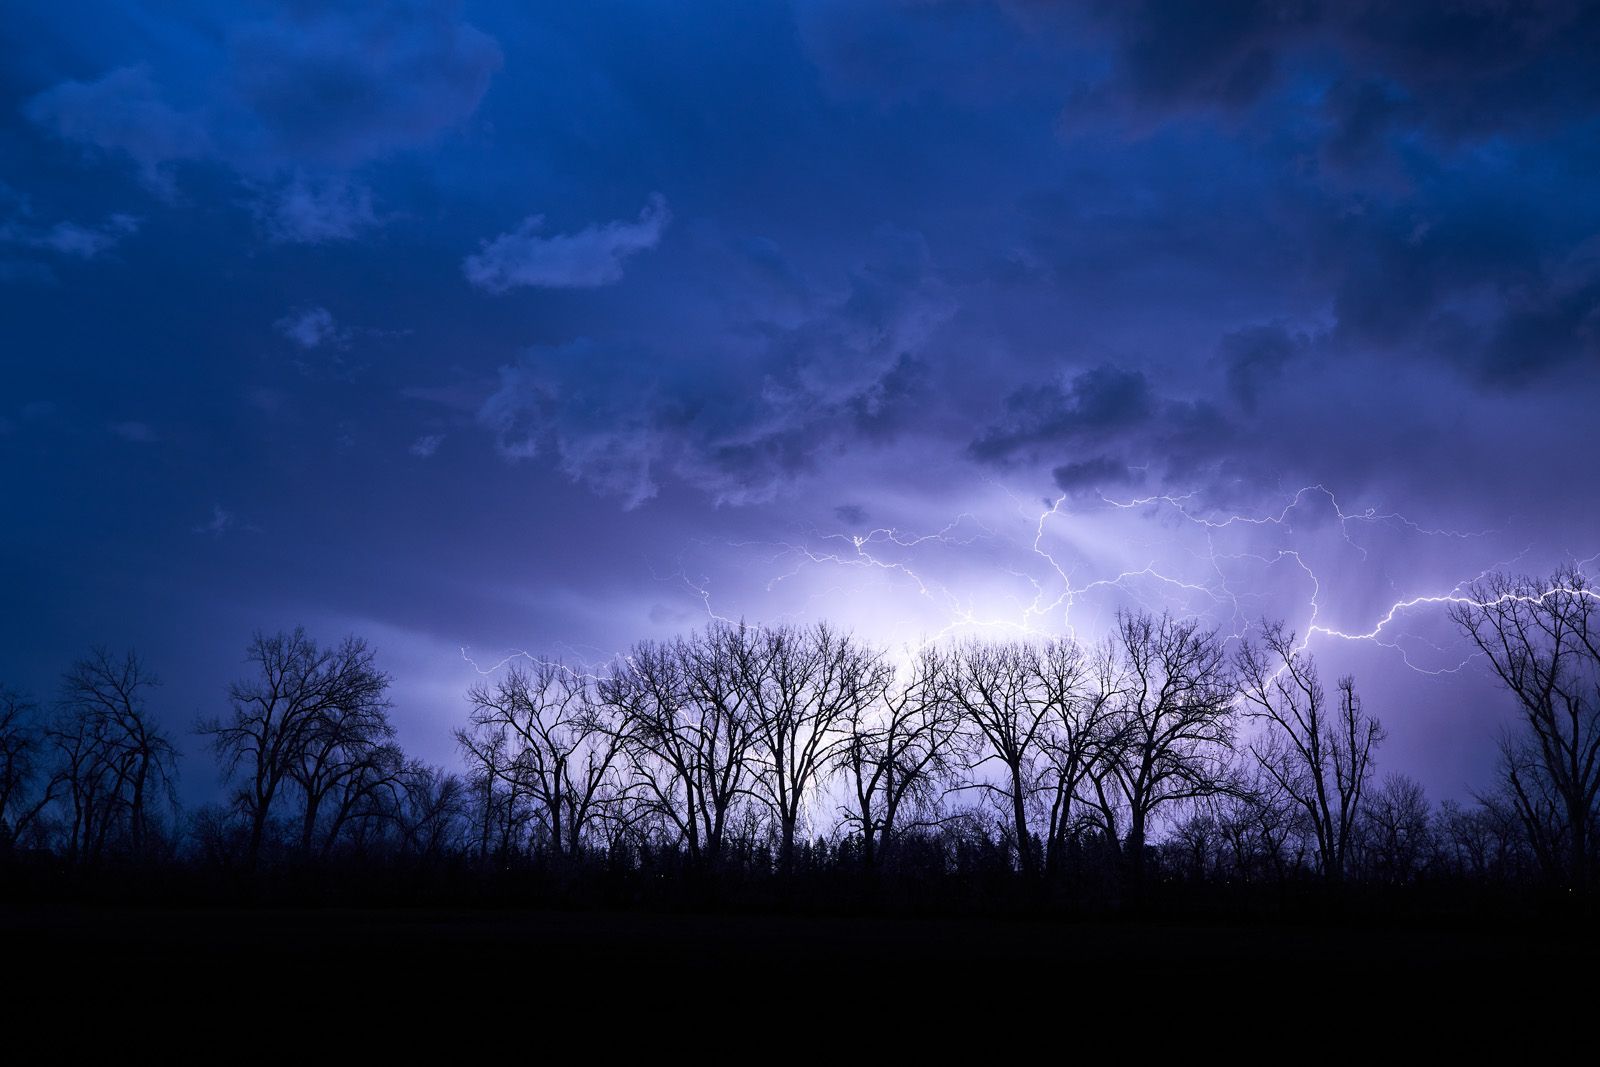 Lightning exposes the cloud structure behind the trees.